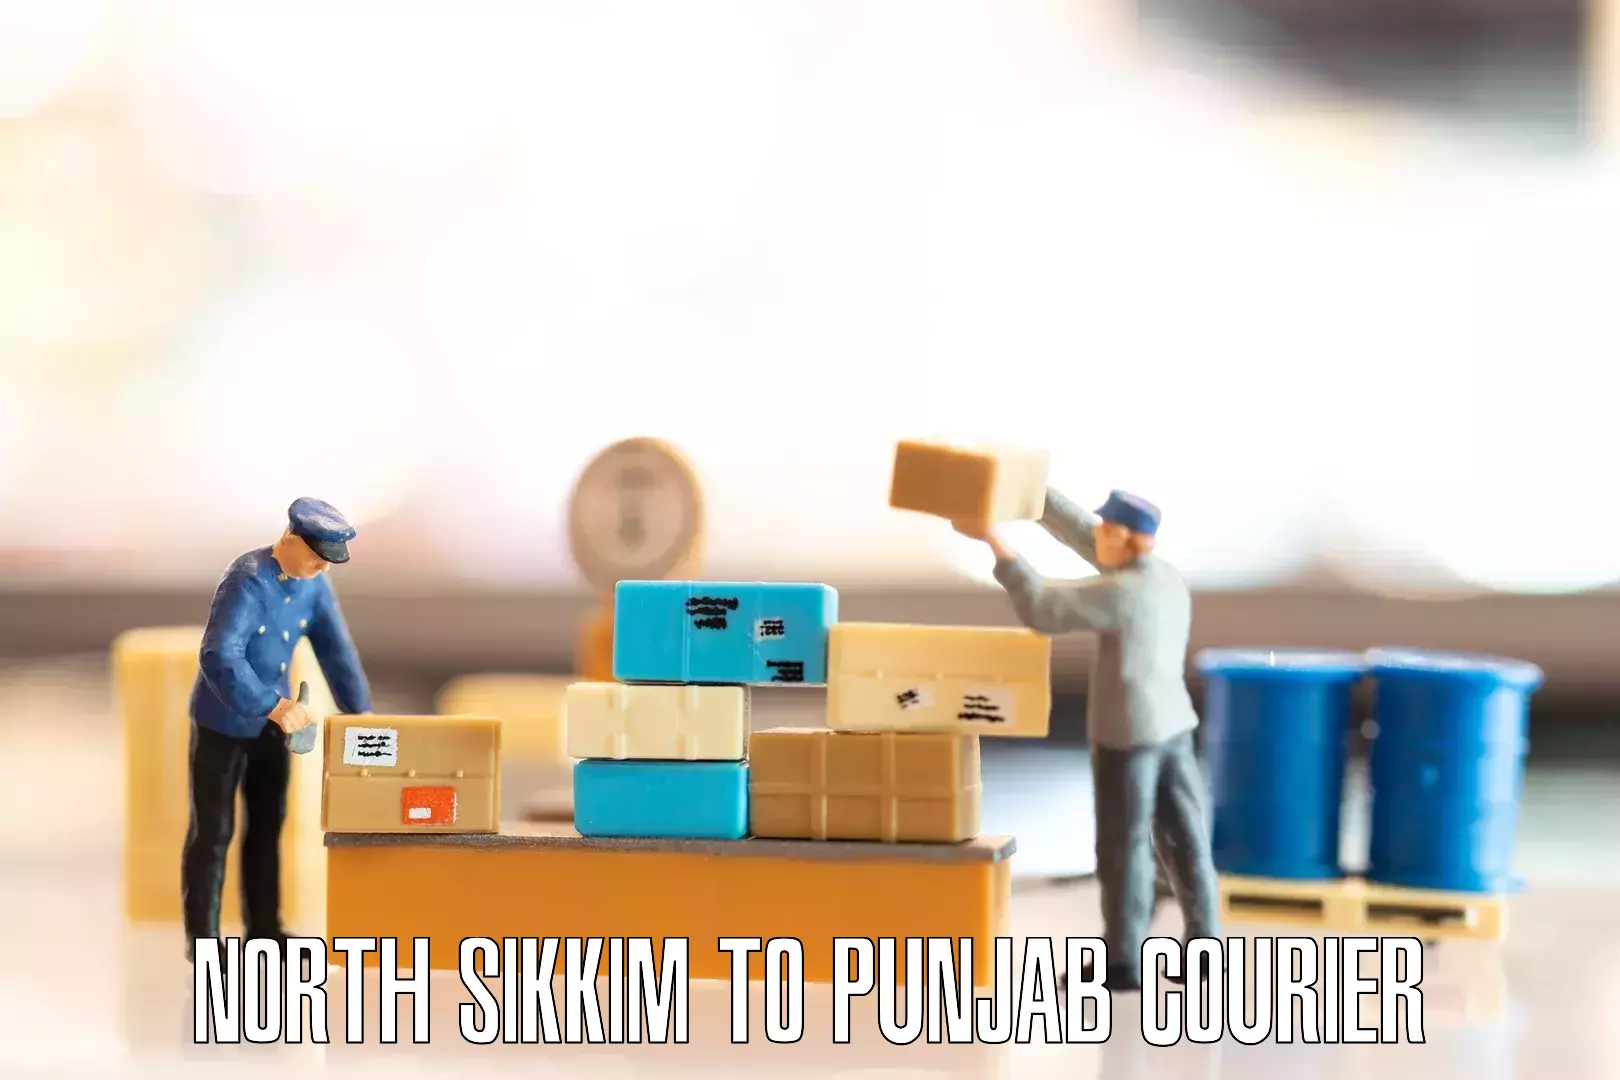 Furniture moving plans in North Sikkim to Mohali